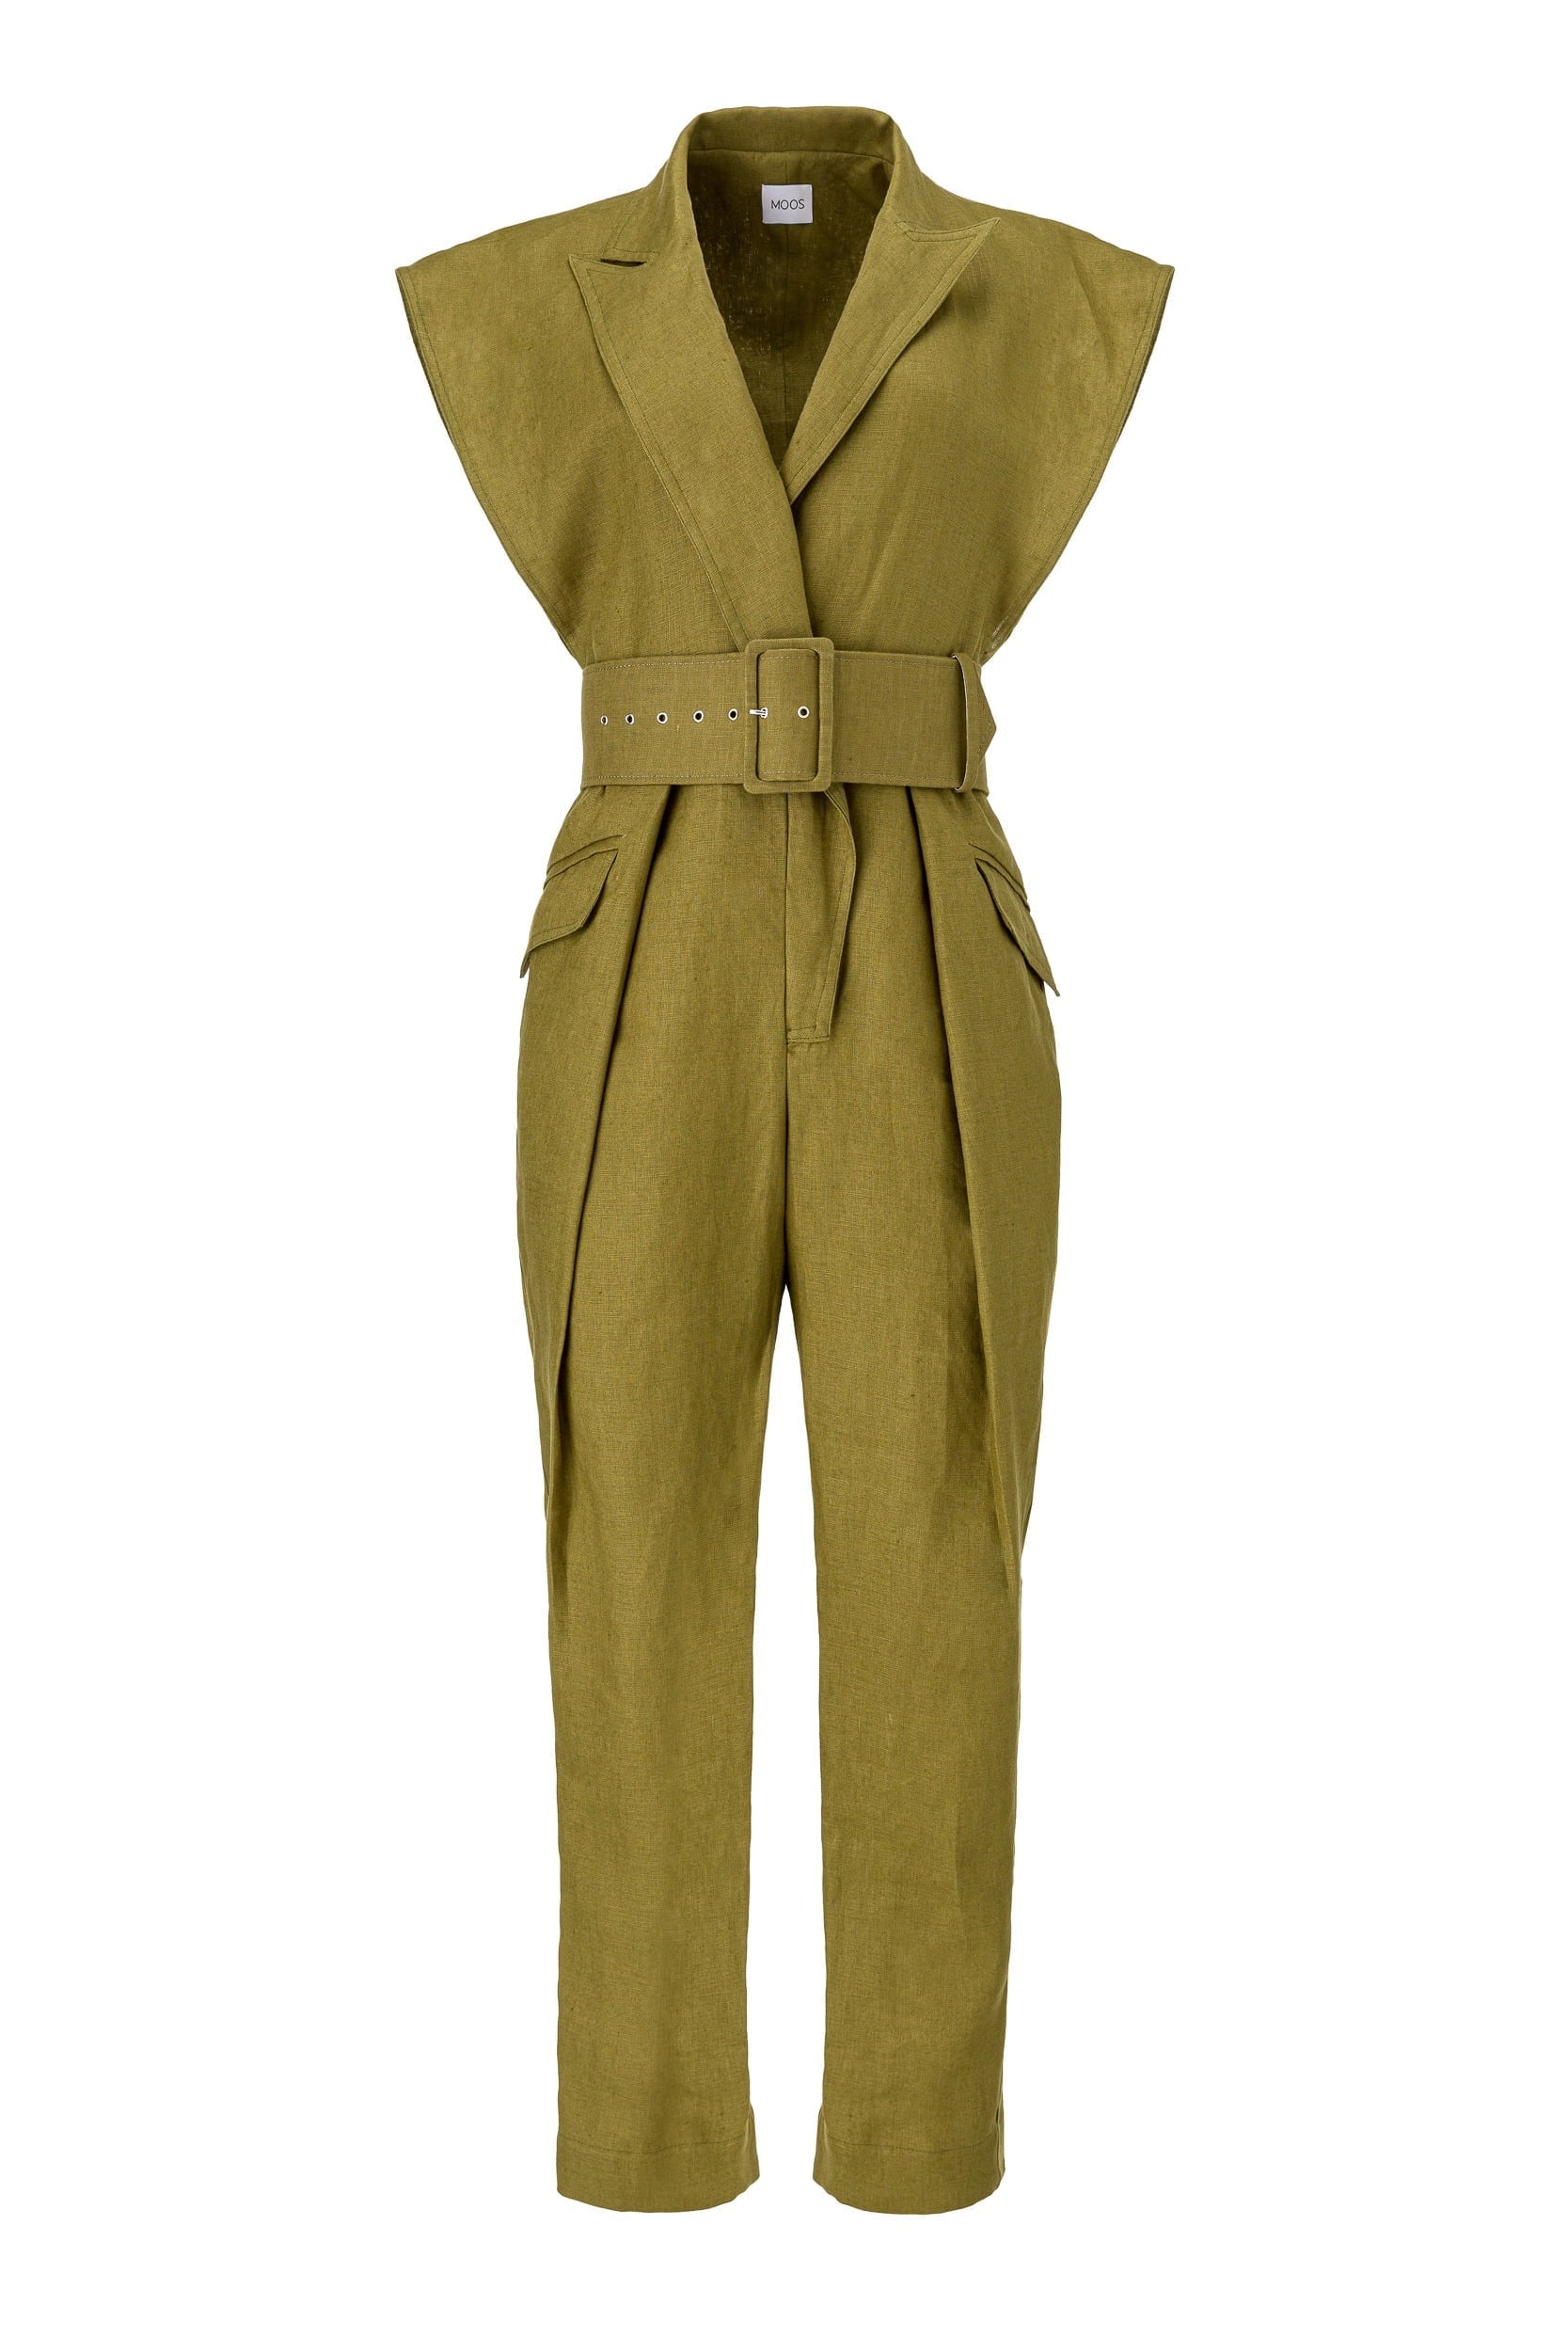 The Army Jumpsuit